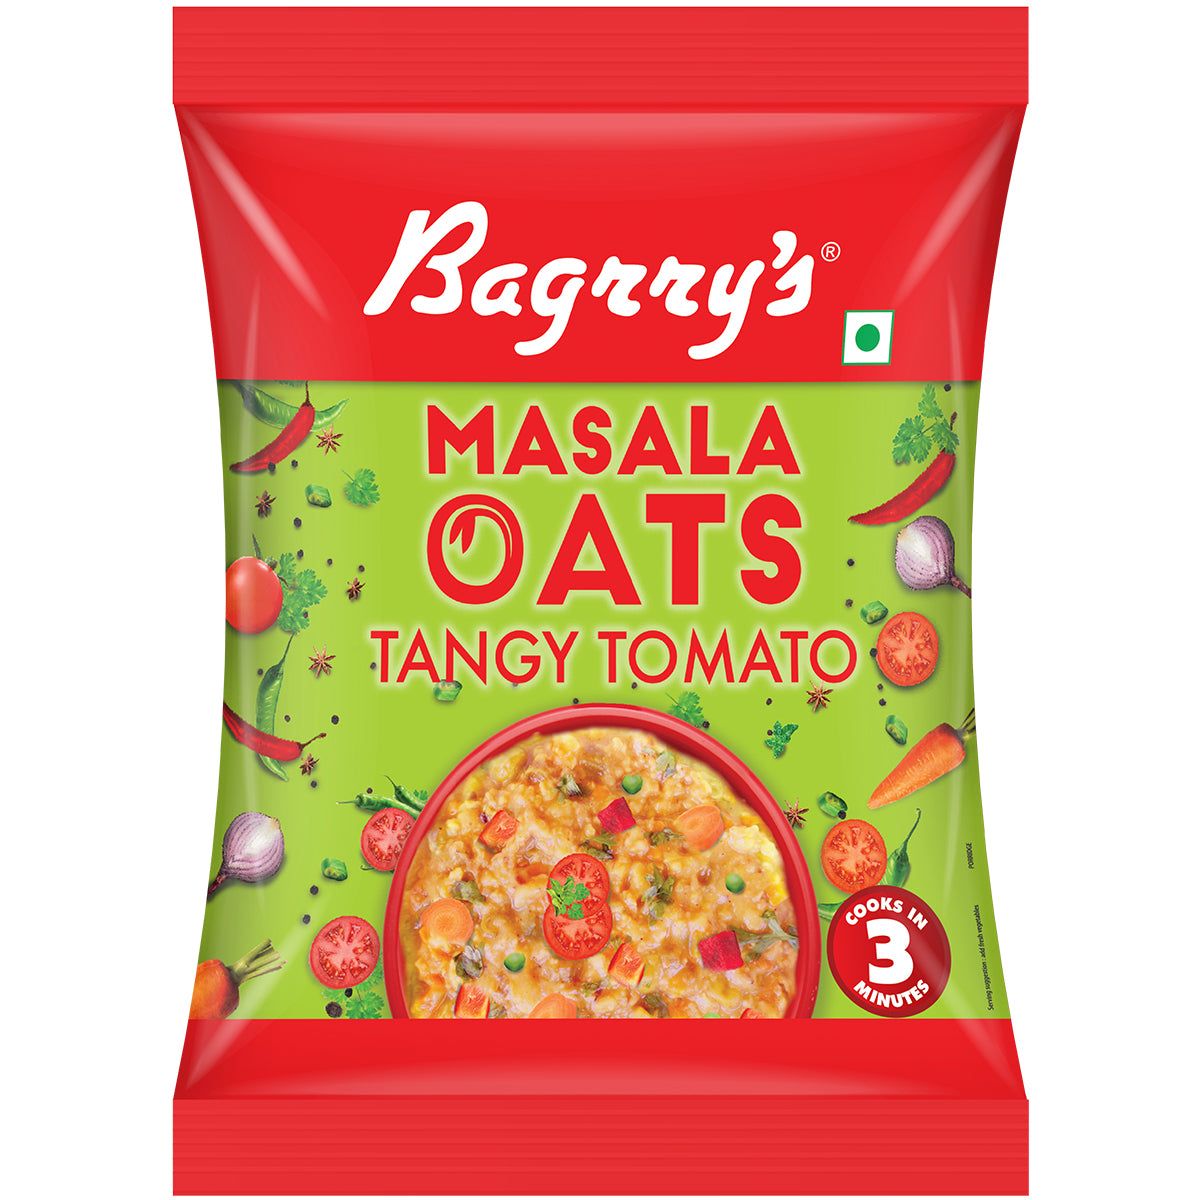 Bagrry's Masala Oats Tangy Tomato Image